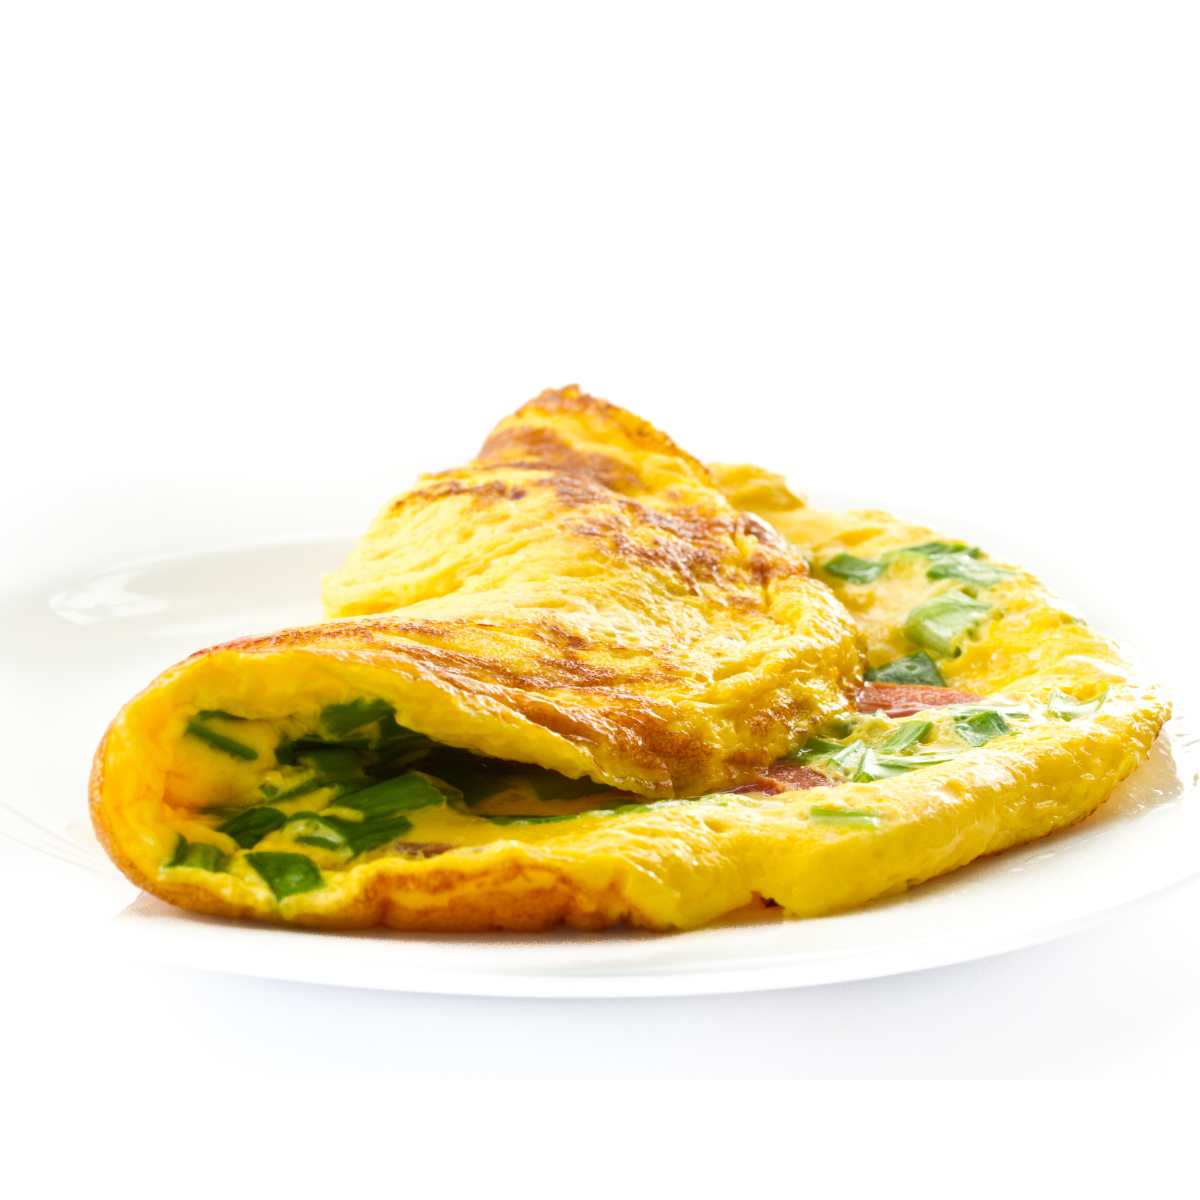 An omelette on a white background.